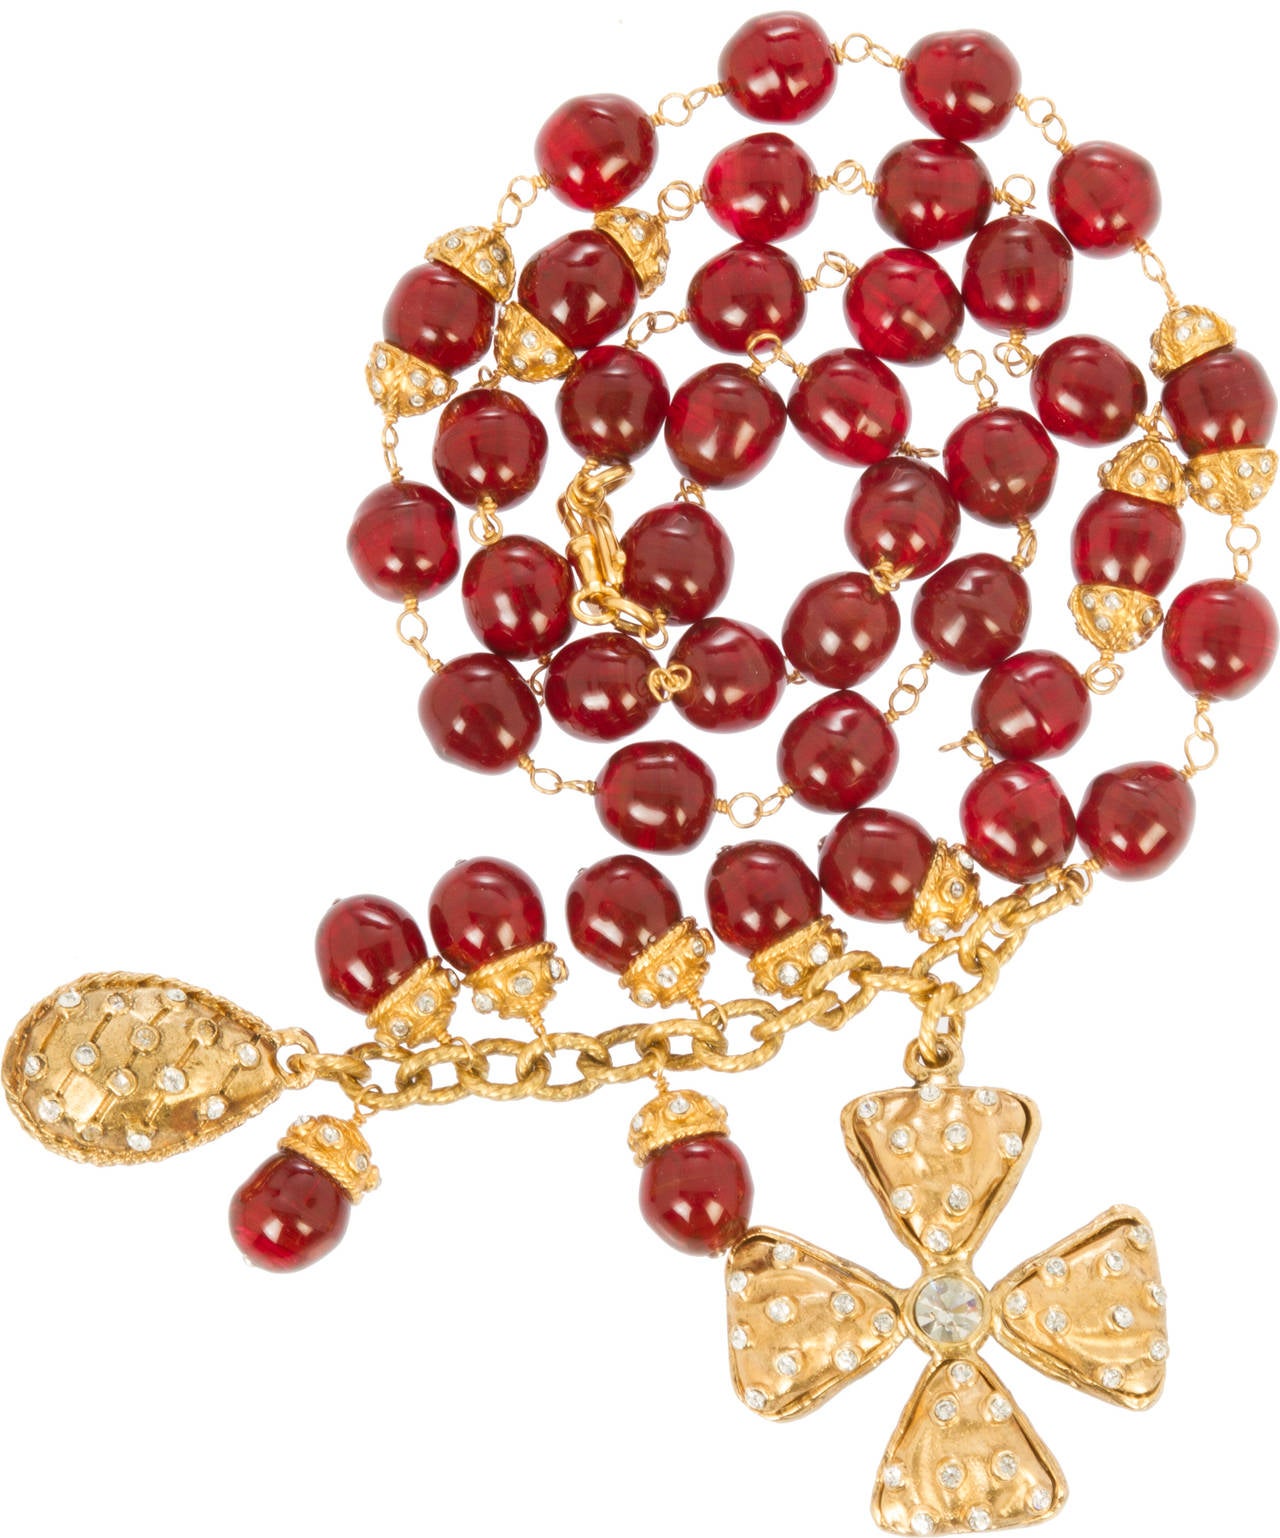 This beautiful necklace features gorgeous red gripoix glass beads and charms studded with crystals. The length of the necklace does not include the additional length of the charms.